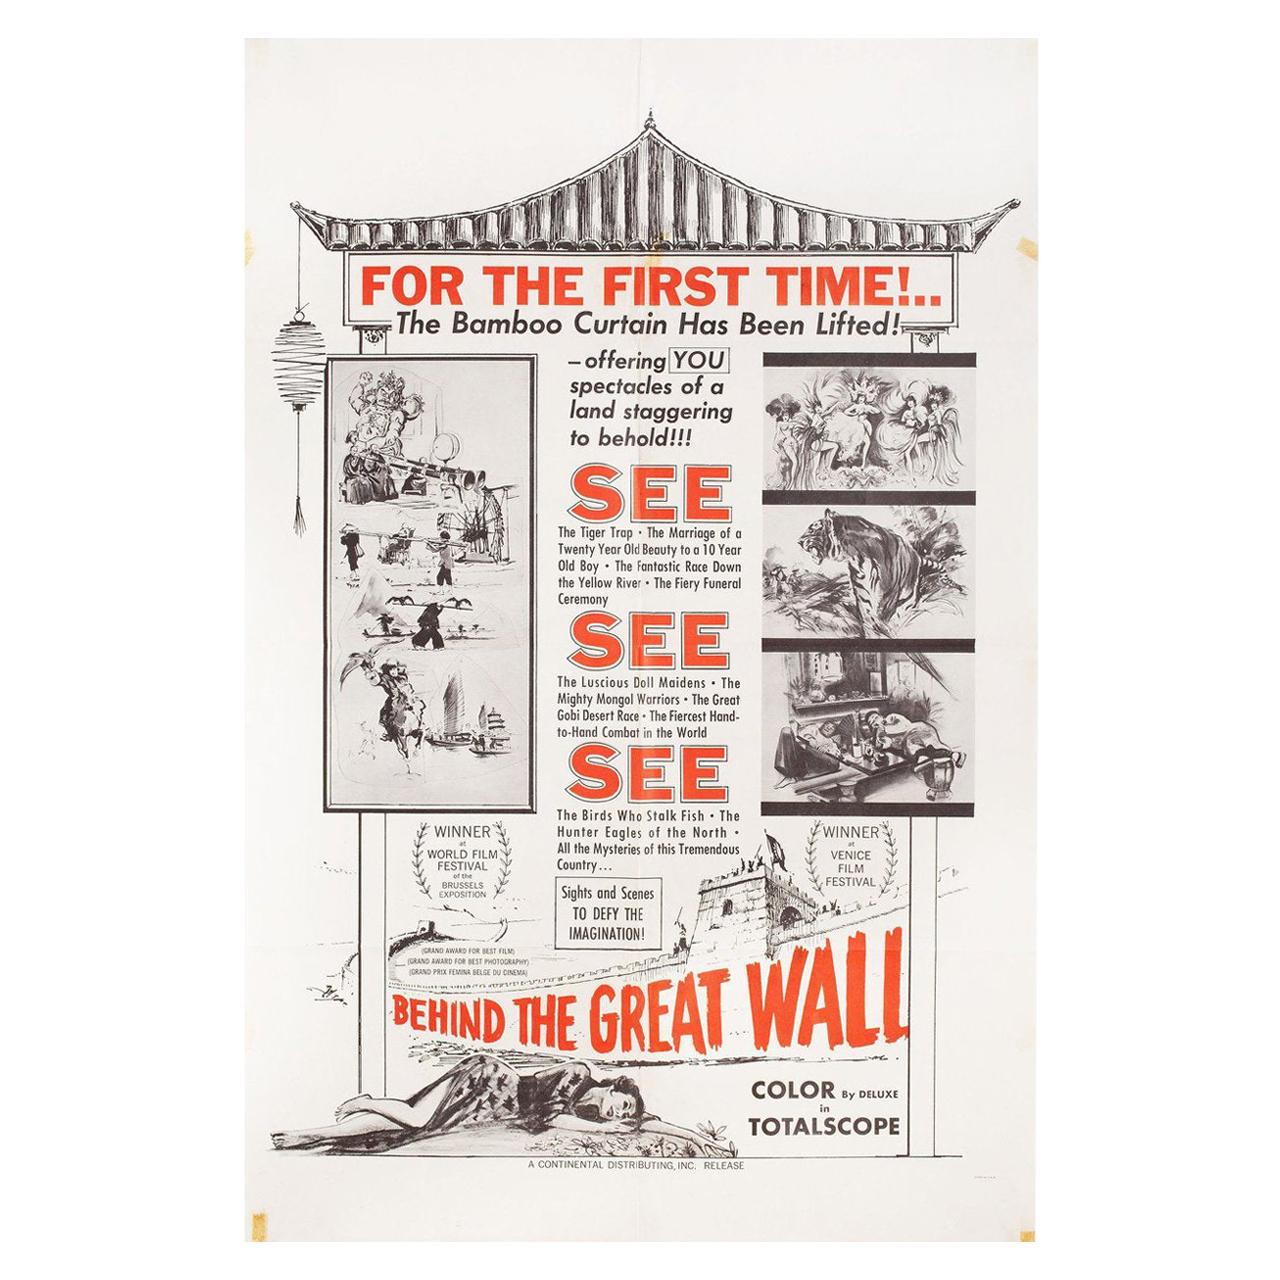 "Behind the Great Wall" 1958 U.S. One Sheet Film Poster